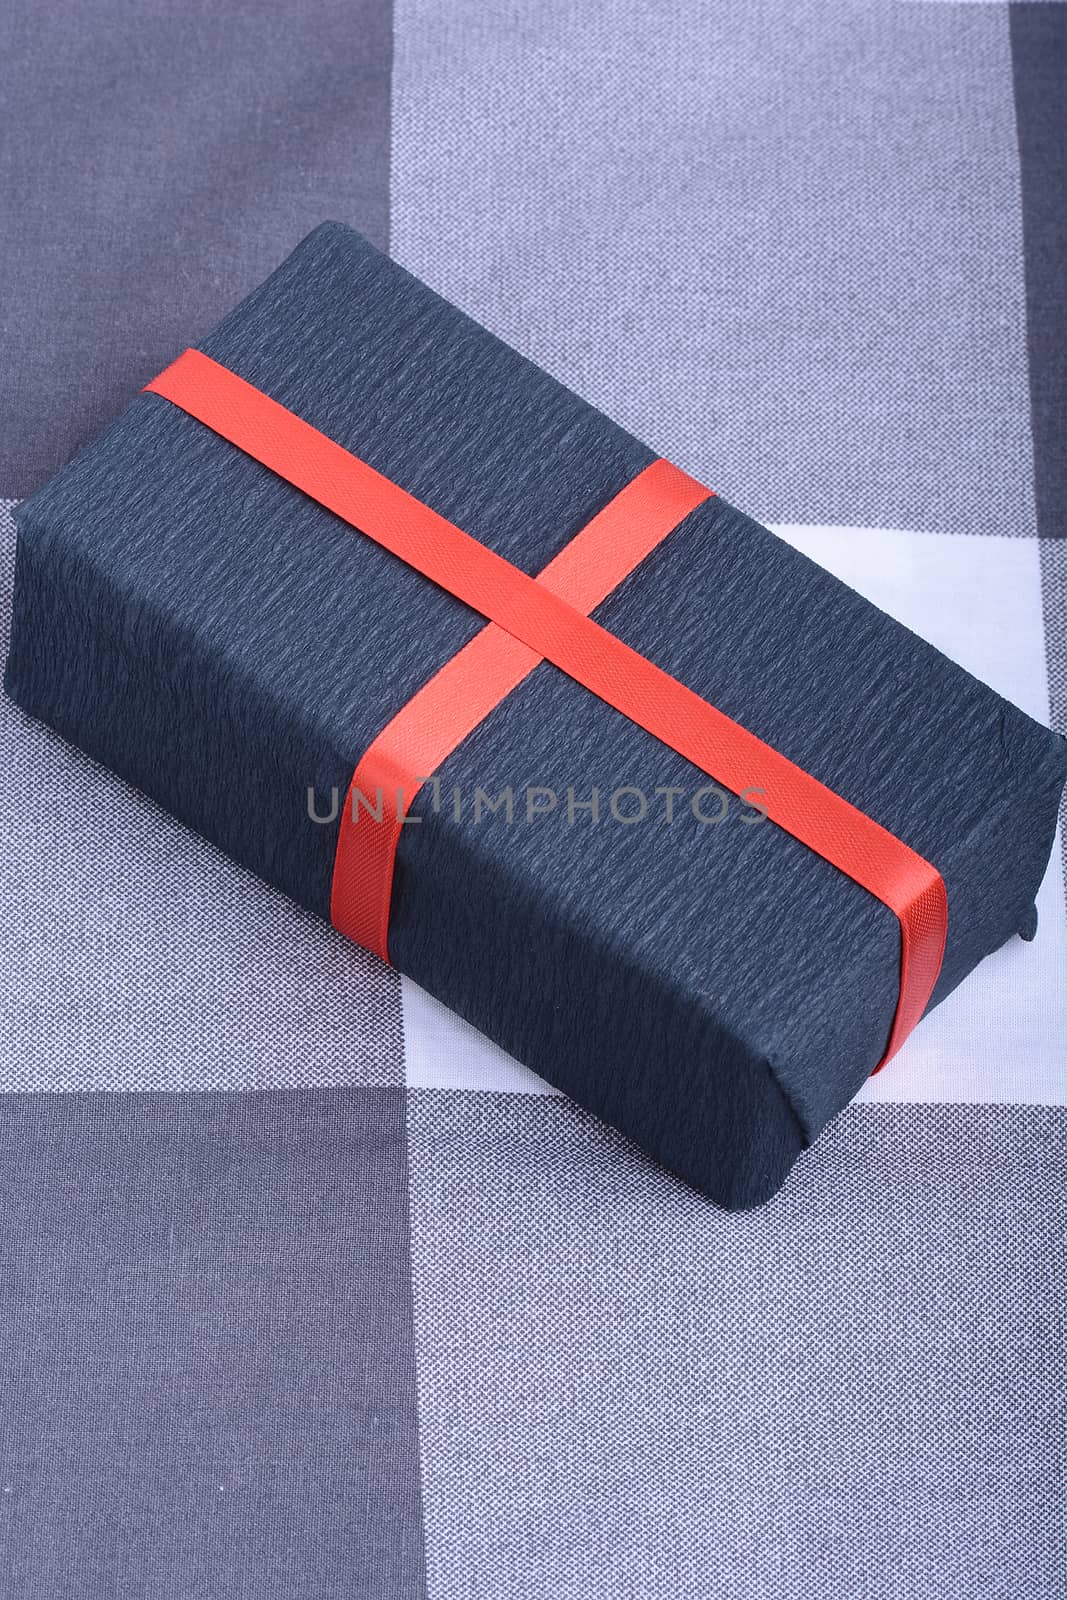 Black gift box with red ribbon by fotoscool